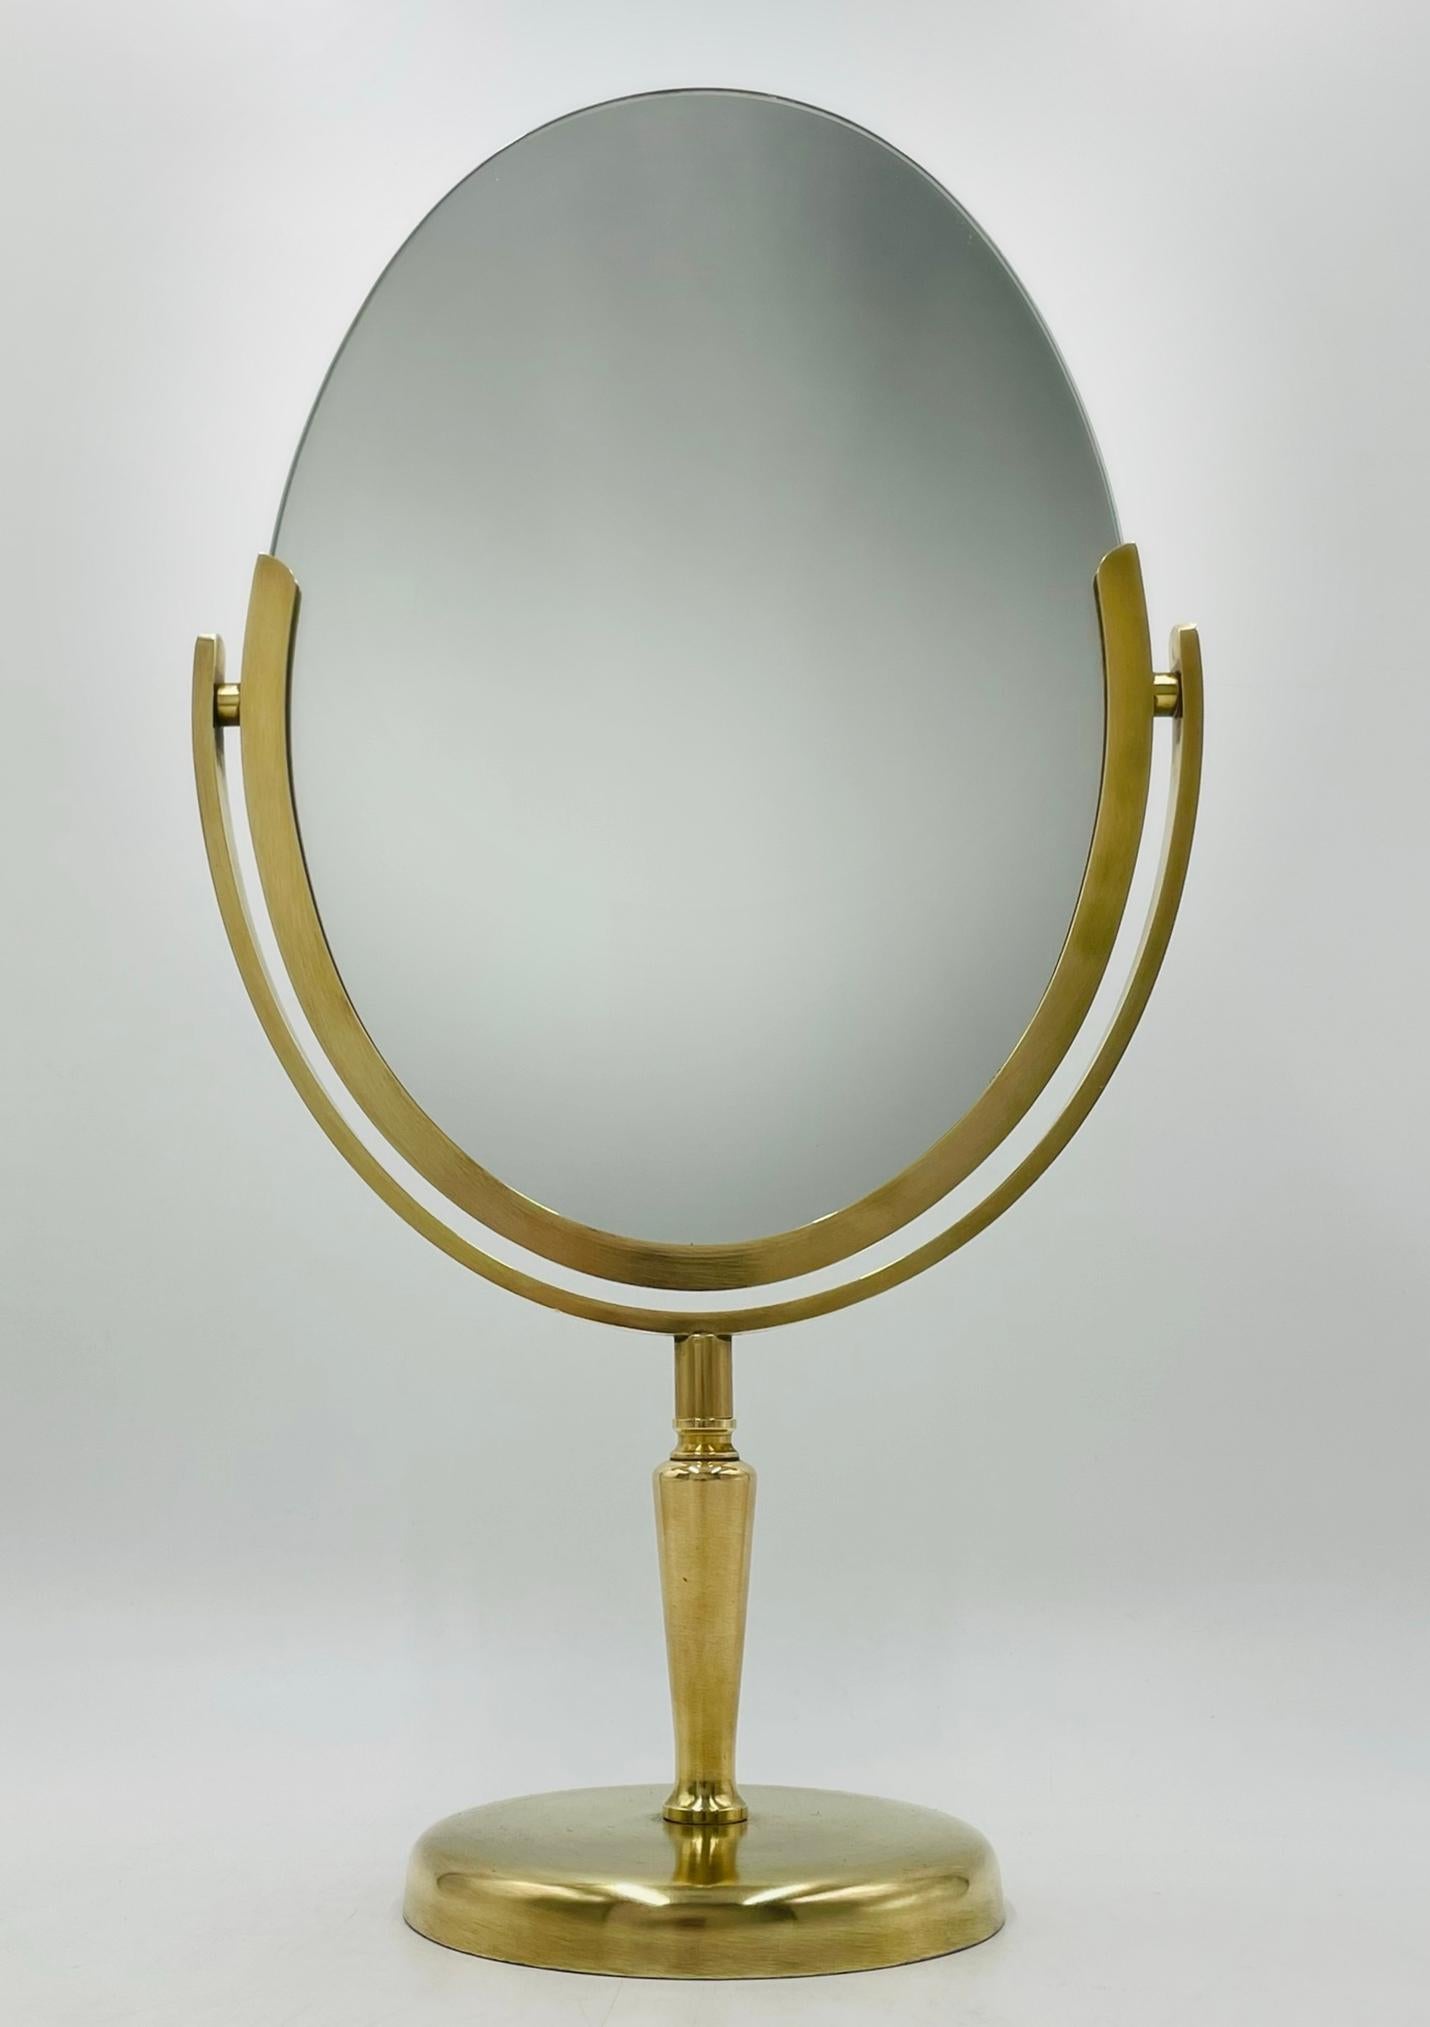 Introducing the exquisite Solid Brass, Dual Sided Vanity Mirror by Charles Hollis Jones, USA 1970's - a timeless piece that exudes luxury and sophistication. Hand made in the US from high-quality solid brass, this mirror is built to last and